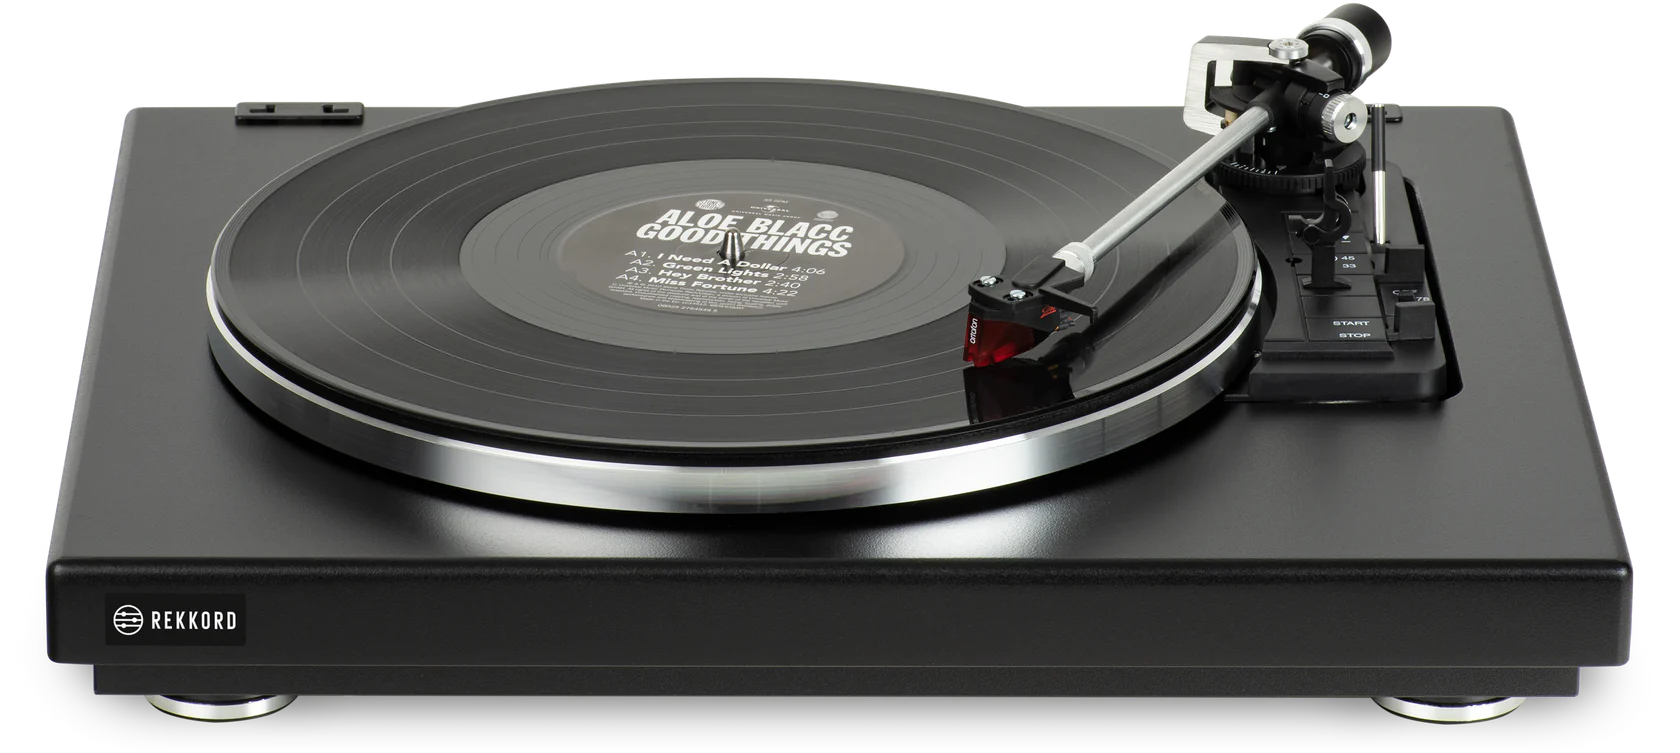 Rekkord Audio F 400 Automatic Turntable Does the Light Lifting